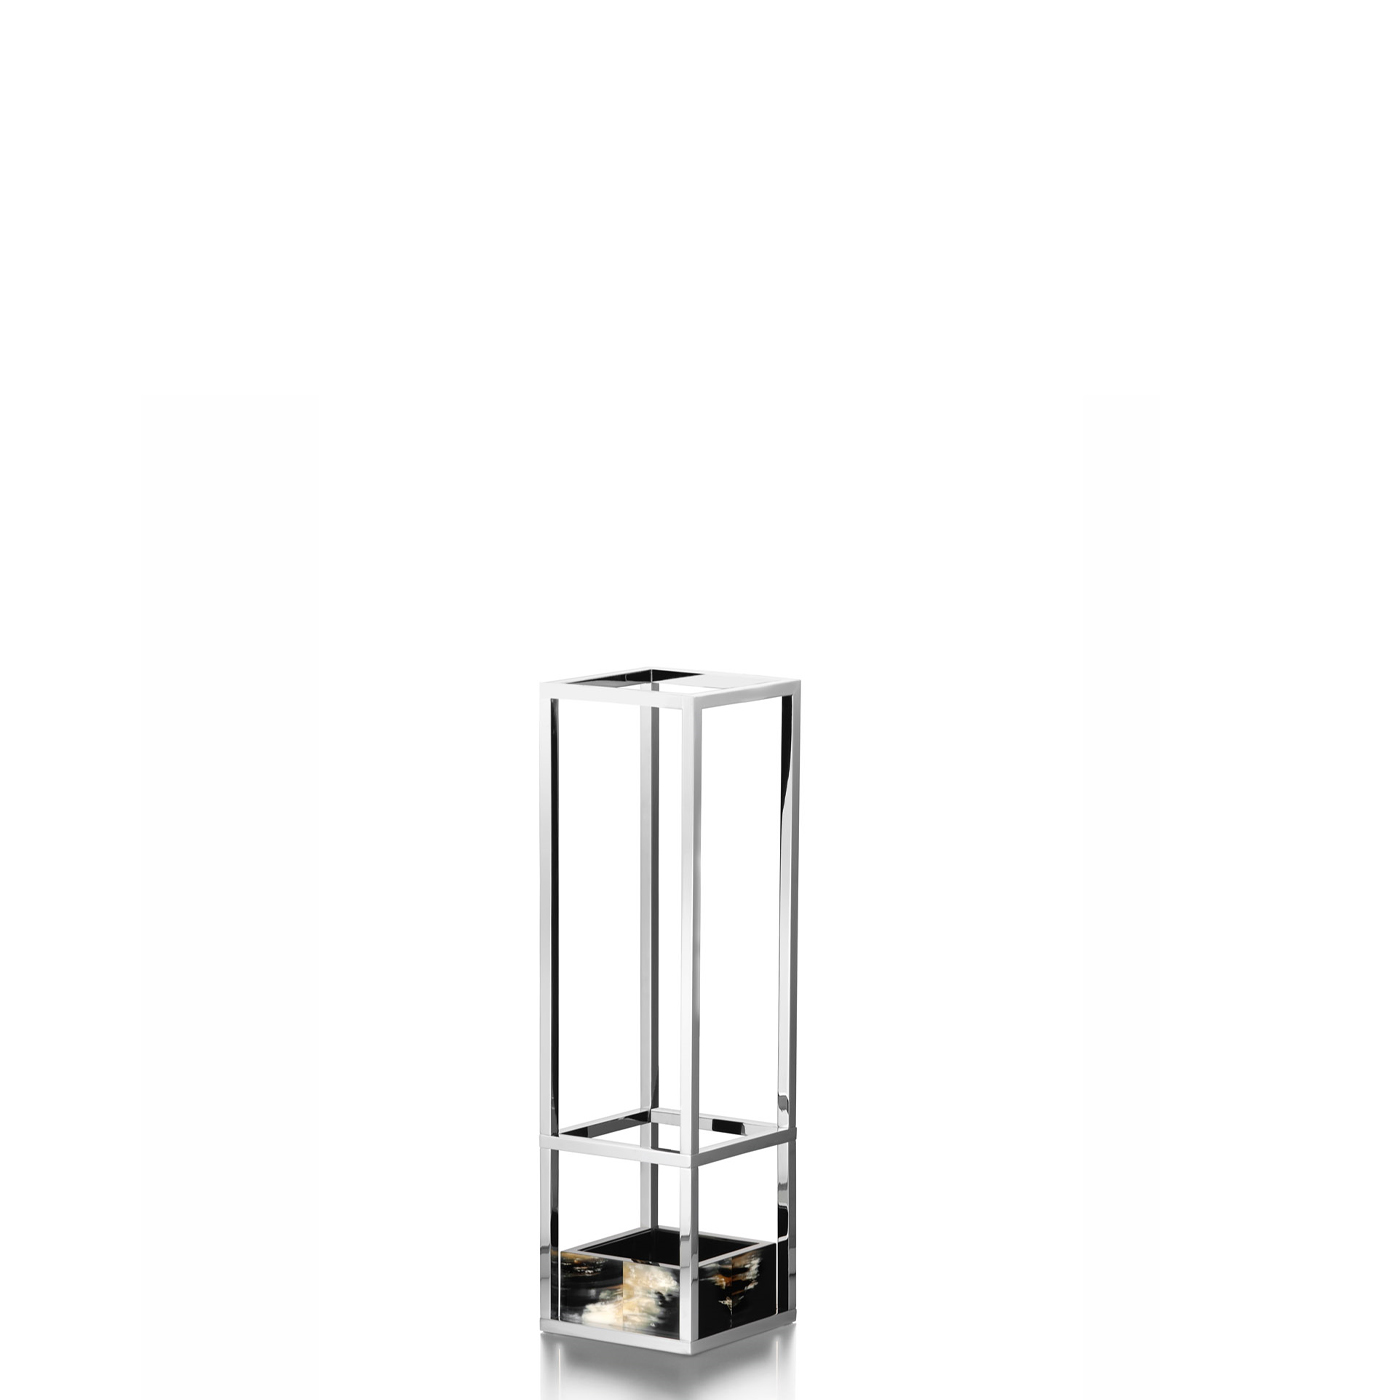 Coat stands and complementary furniture - Pluvio umbrella stand in horn and stainless steel - Arcahorn